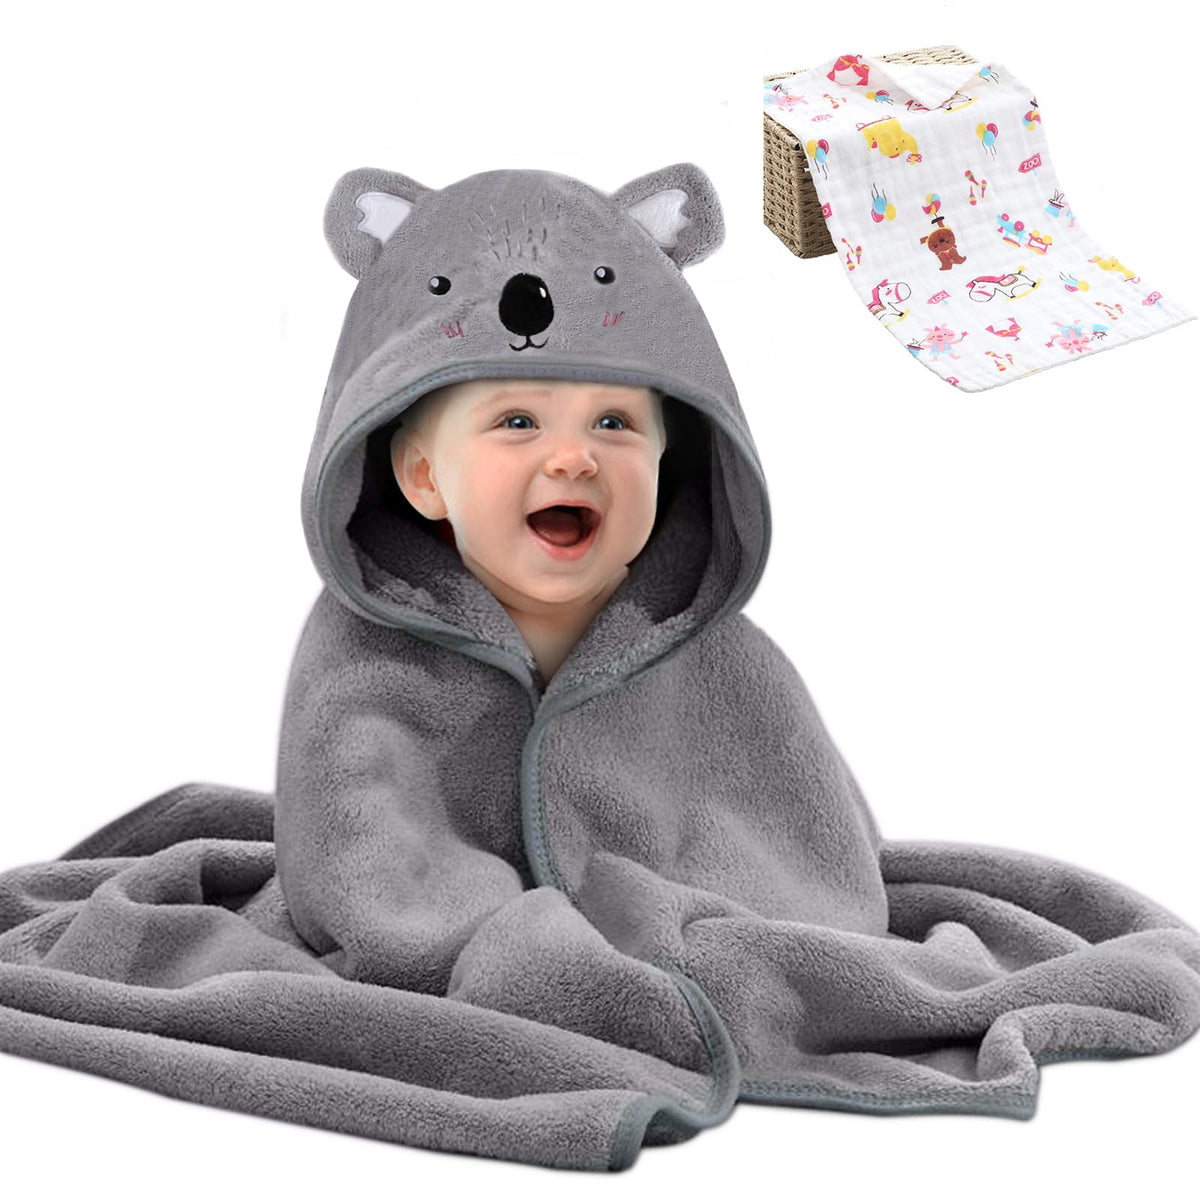 Asnewkit Hooded Baby Towel, Baby Bath Towels with Hood,Unique Animal Design Baby Towel with Hood Soft Absorbent Baby Bath Towels, for Newborn Baby Boy and Girl (Grey Koala)